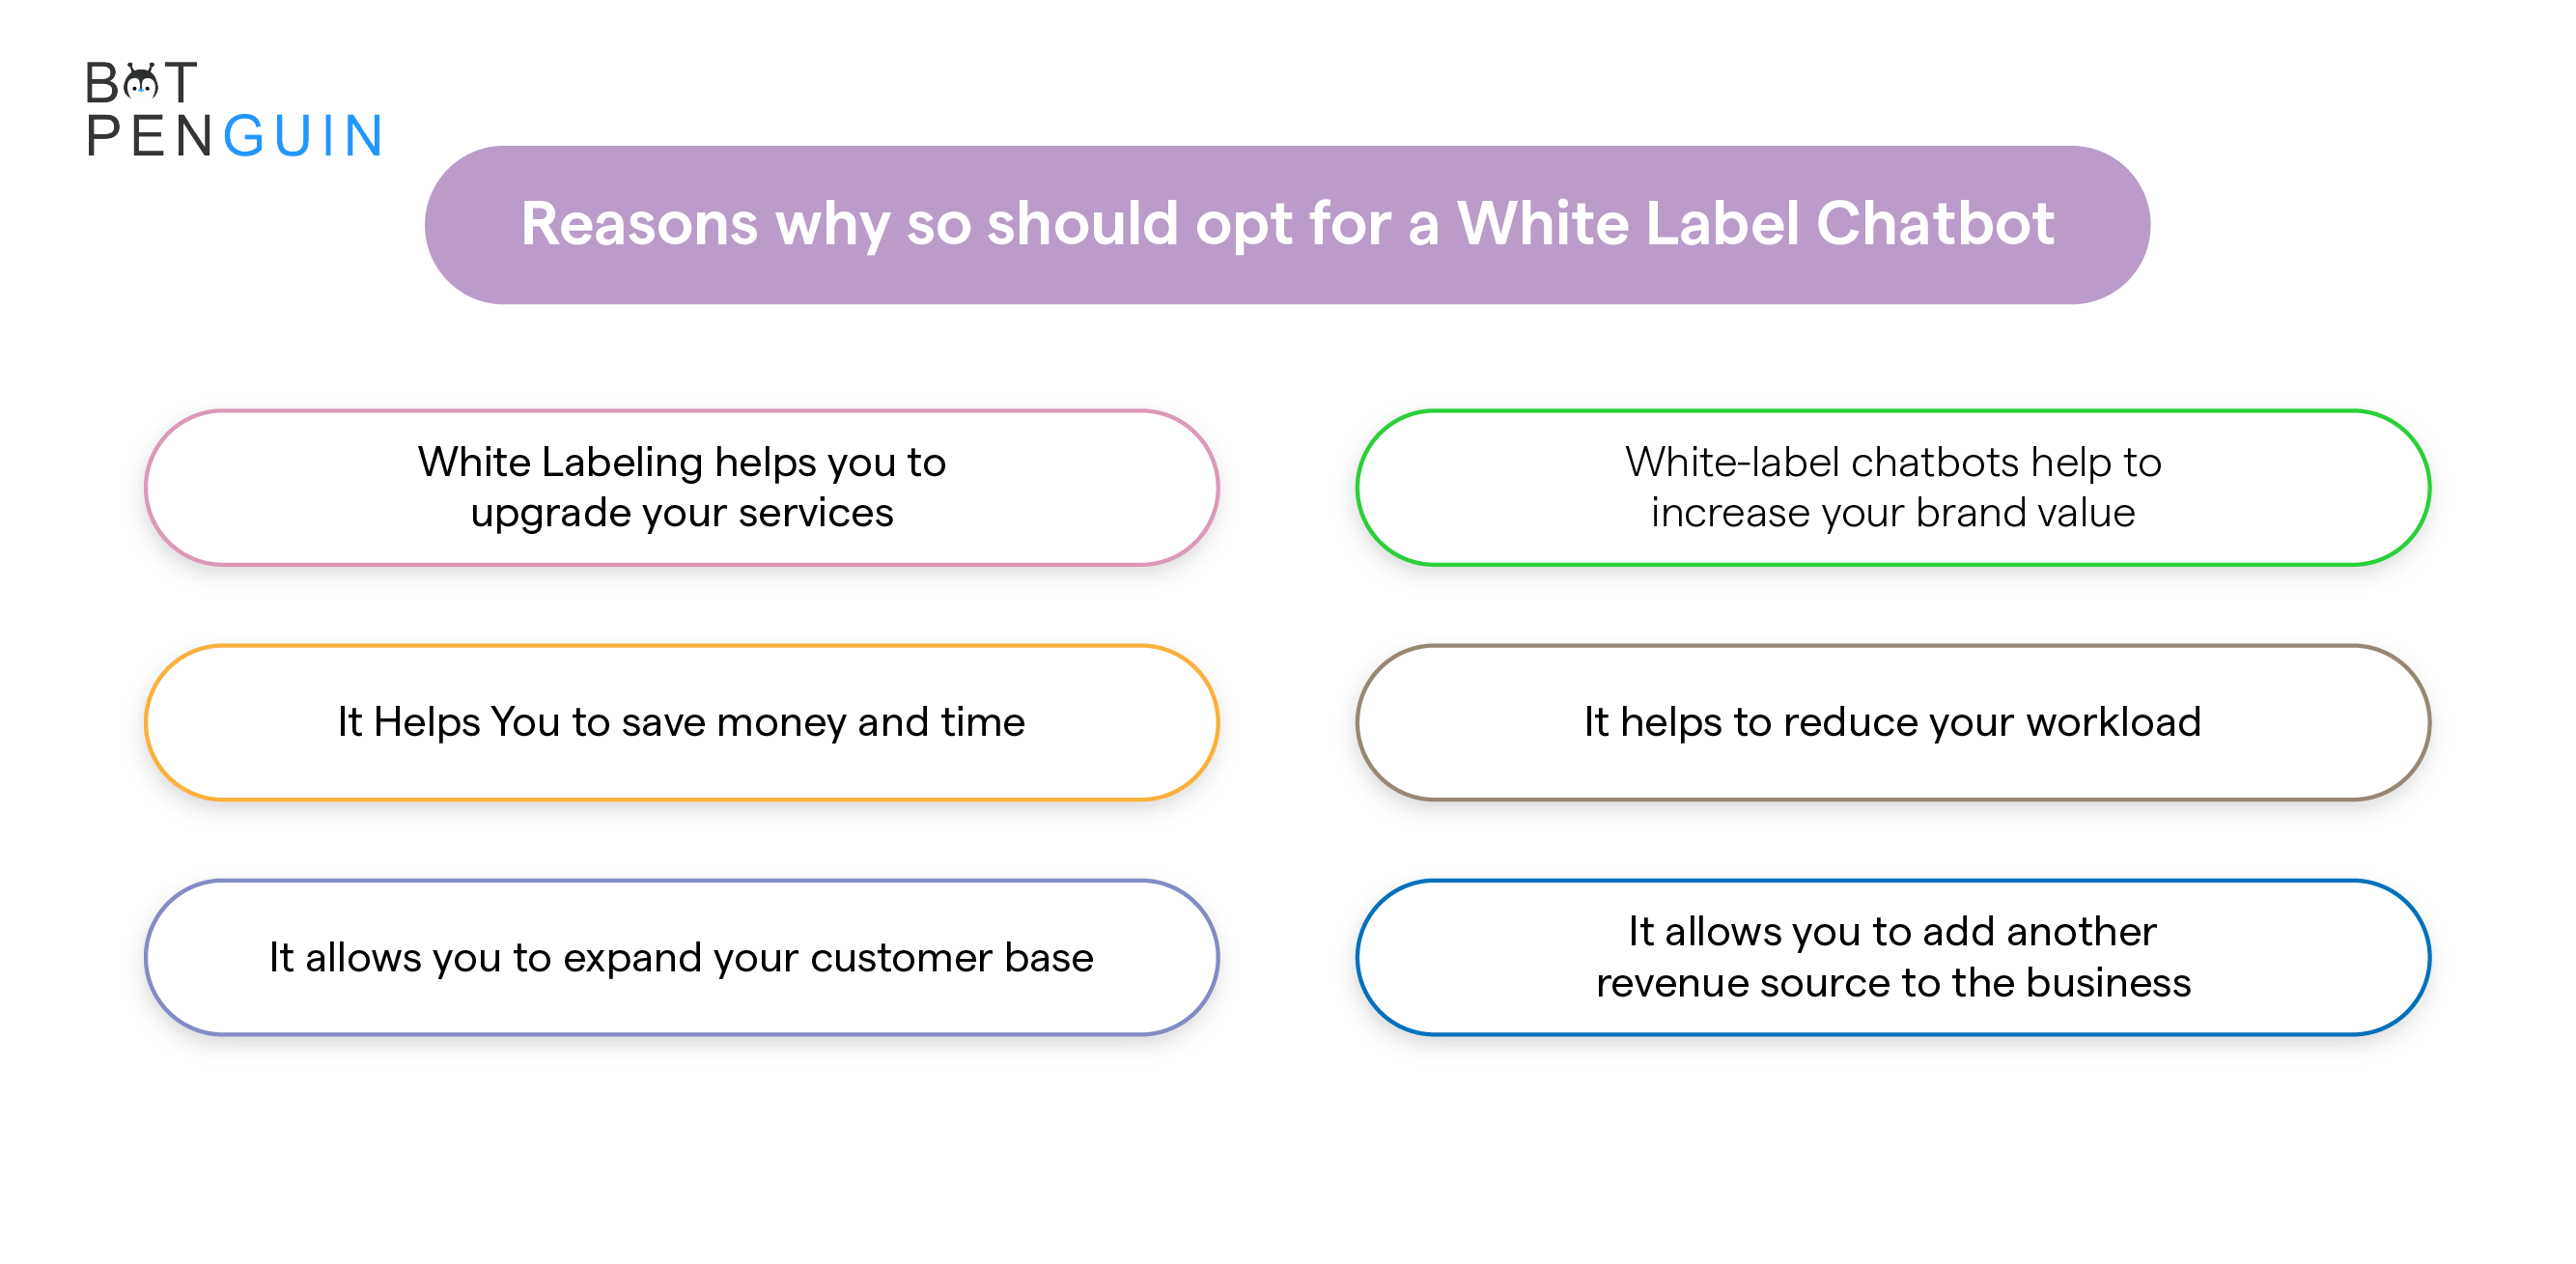 Six reasons why so should opt for a White Label Chatbot